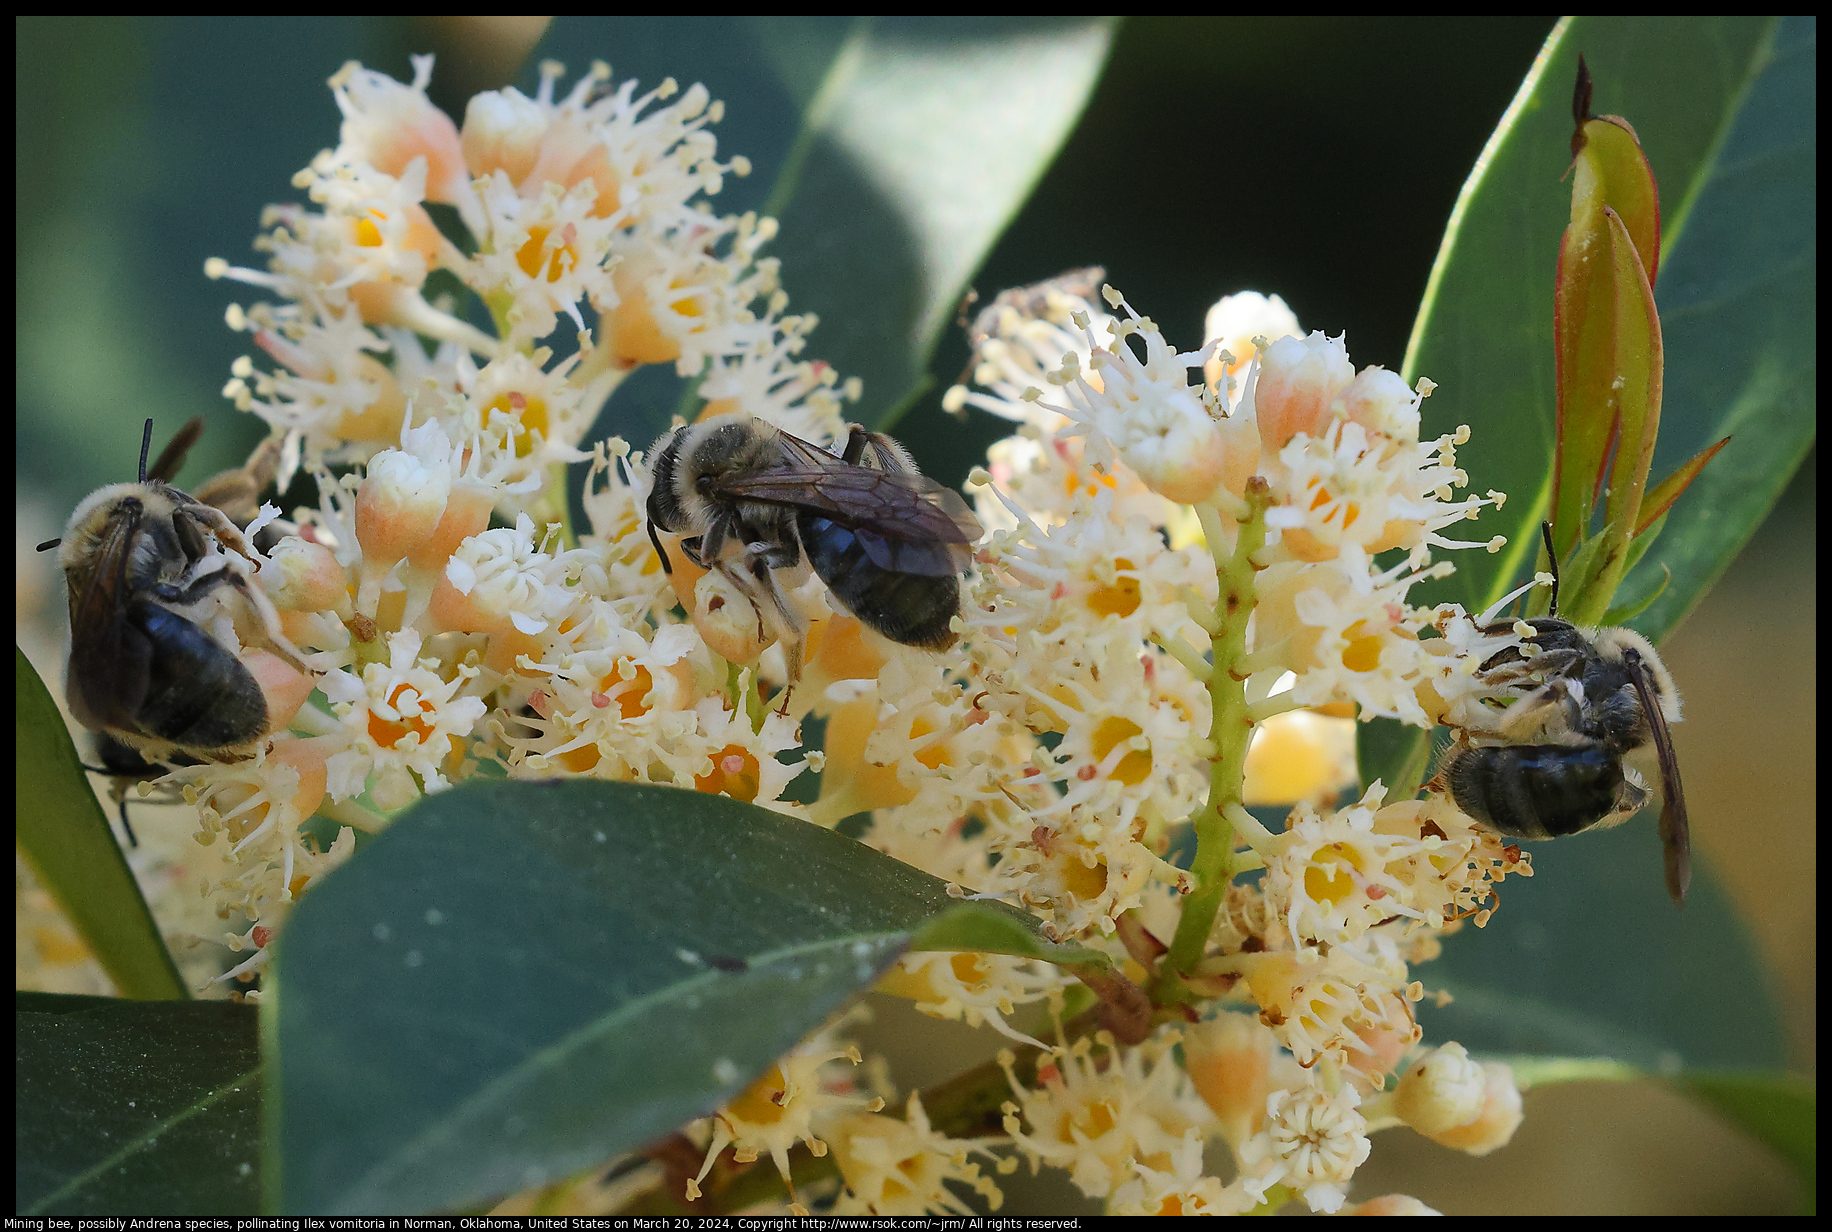 Mining bee, possibly Andrena species, pollinating Ilex vomitoria in Norman, Oklahoma, United States on March 20, 2024